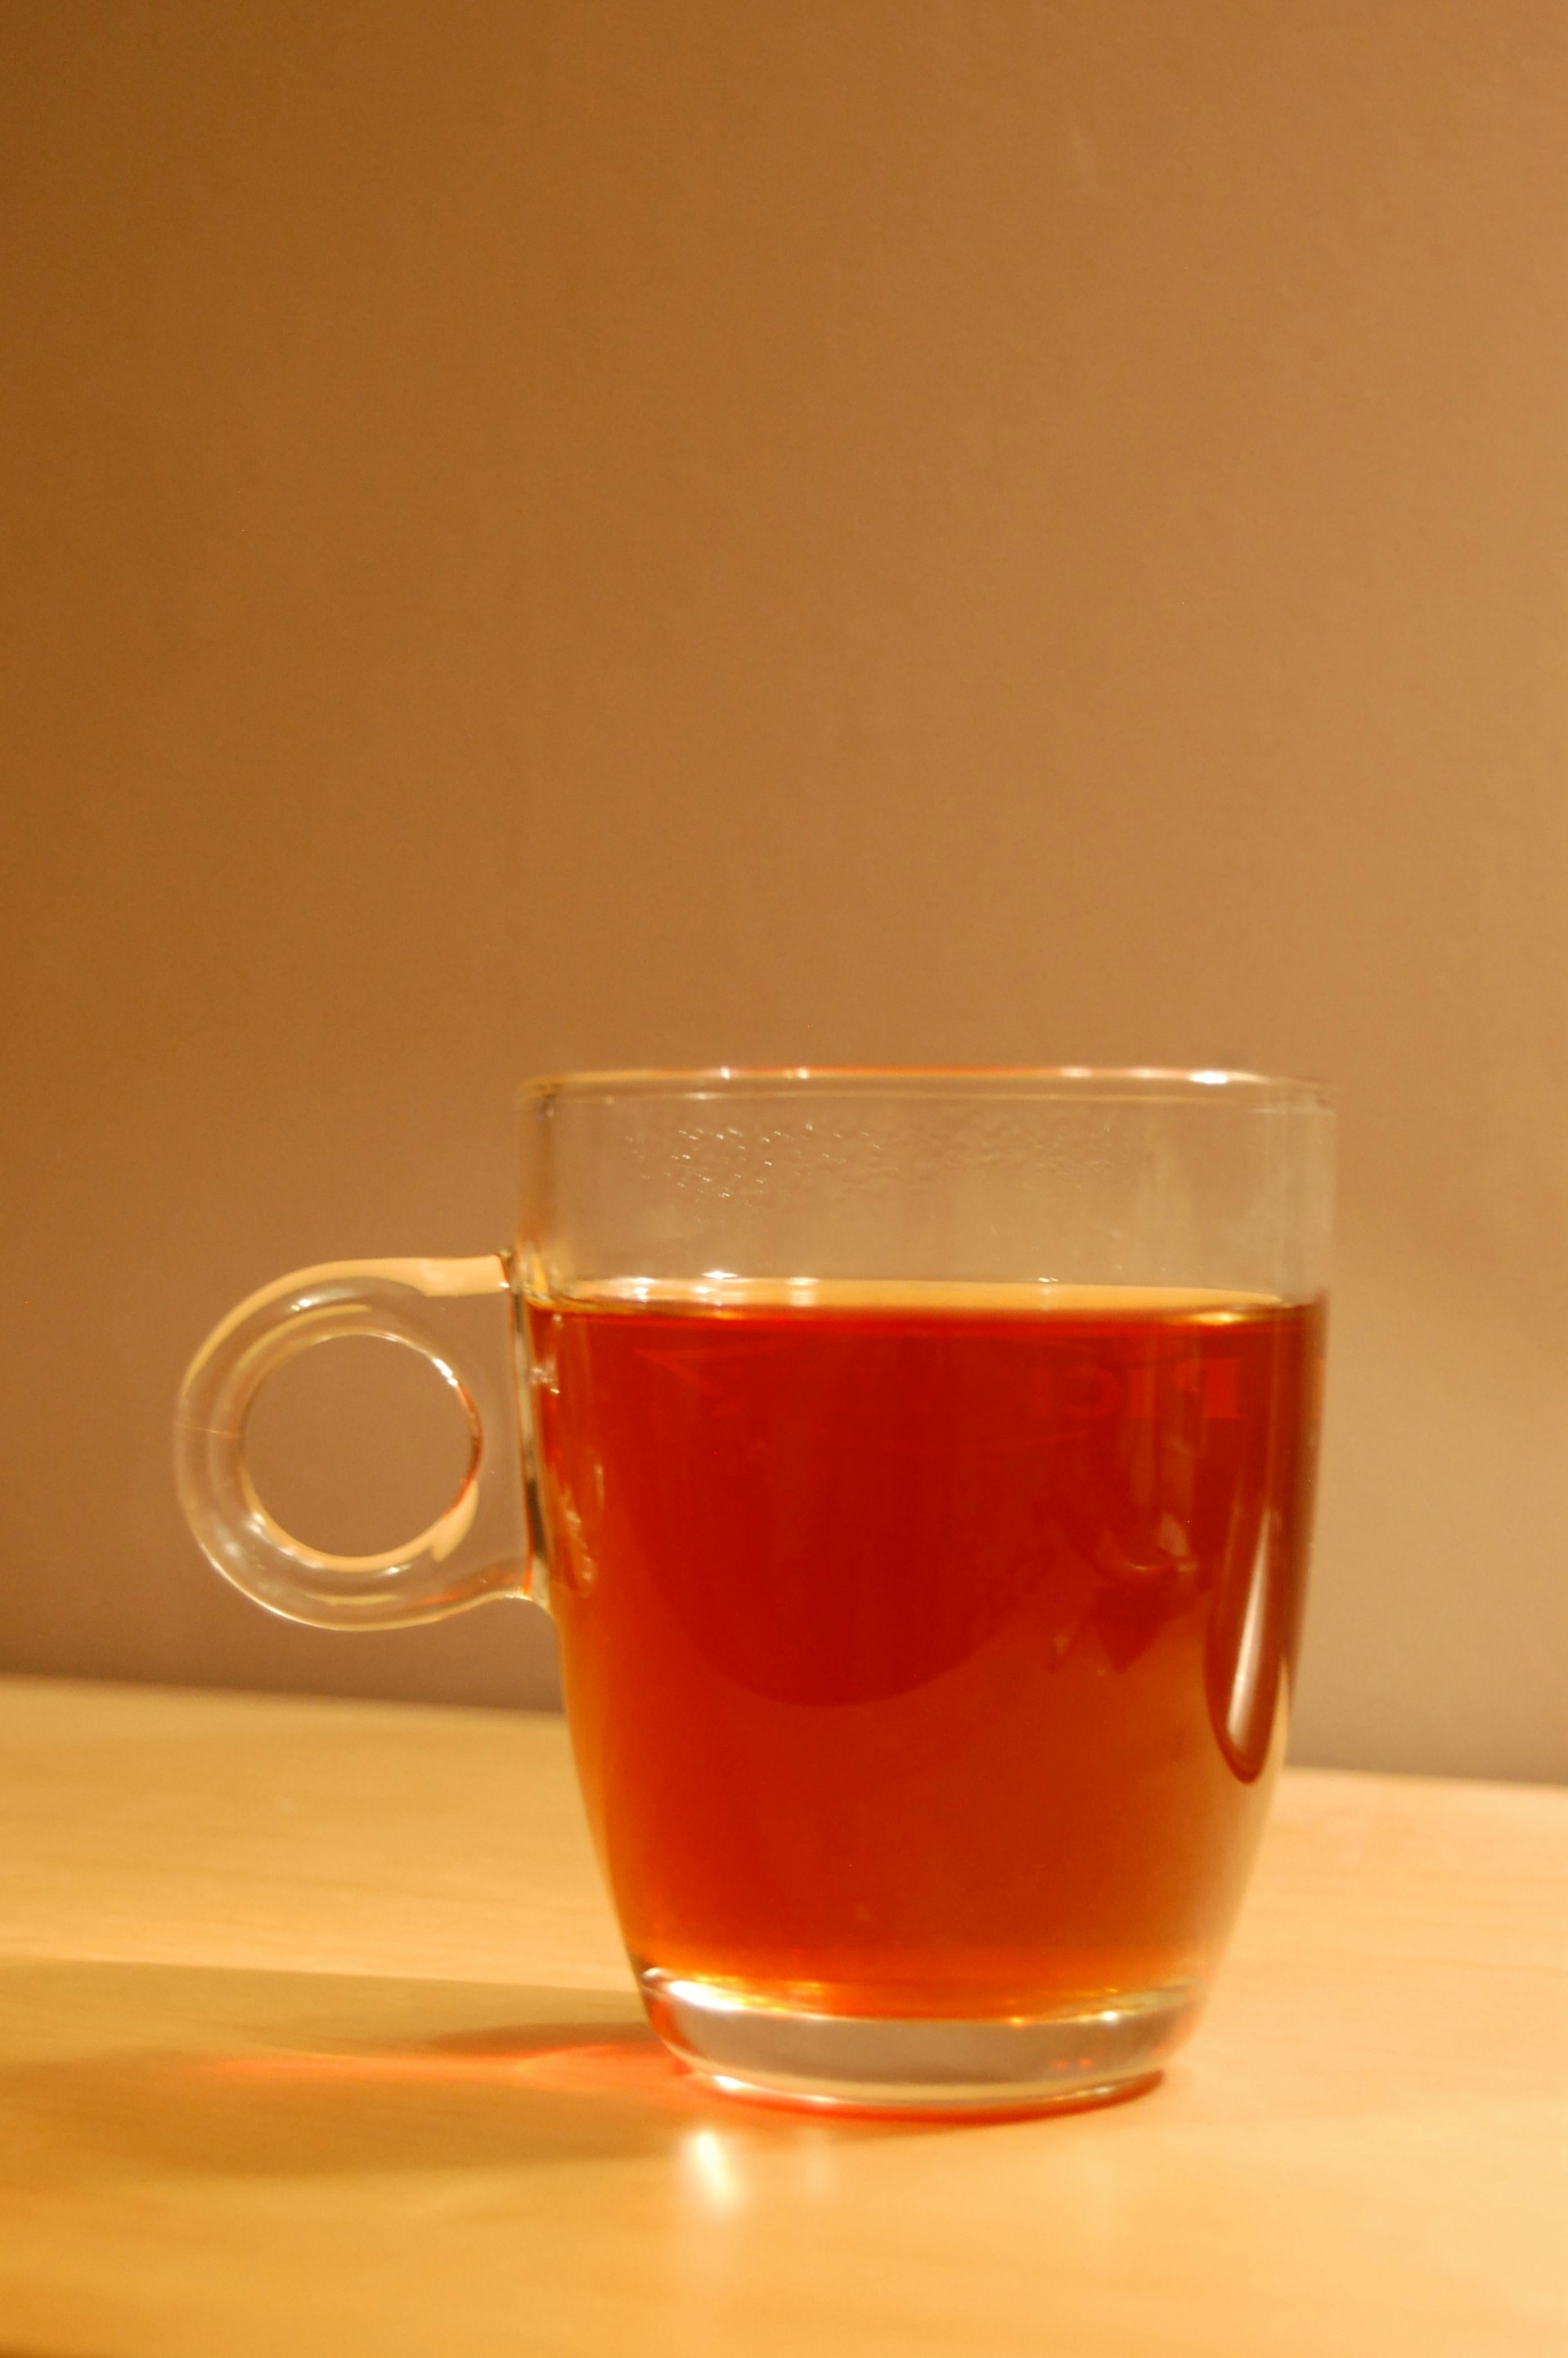 Hygge picture of a glass cup of red tea in a warm homely setting.